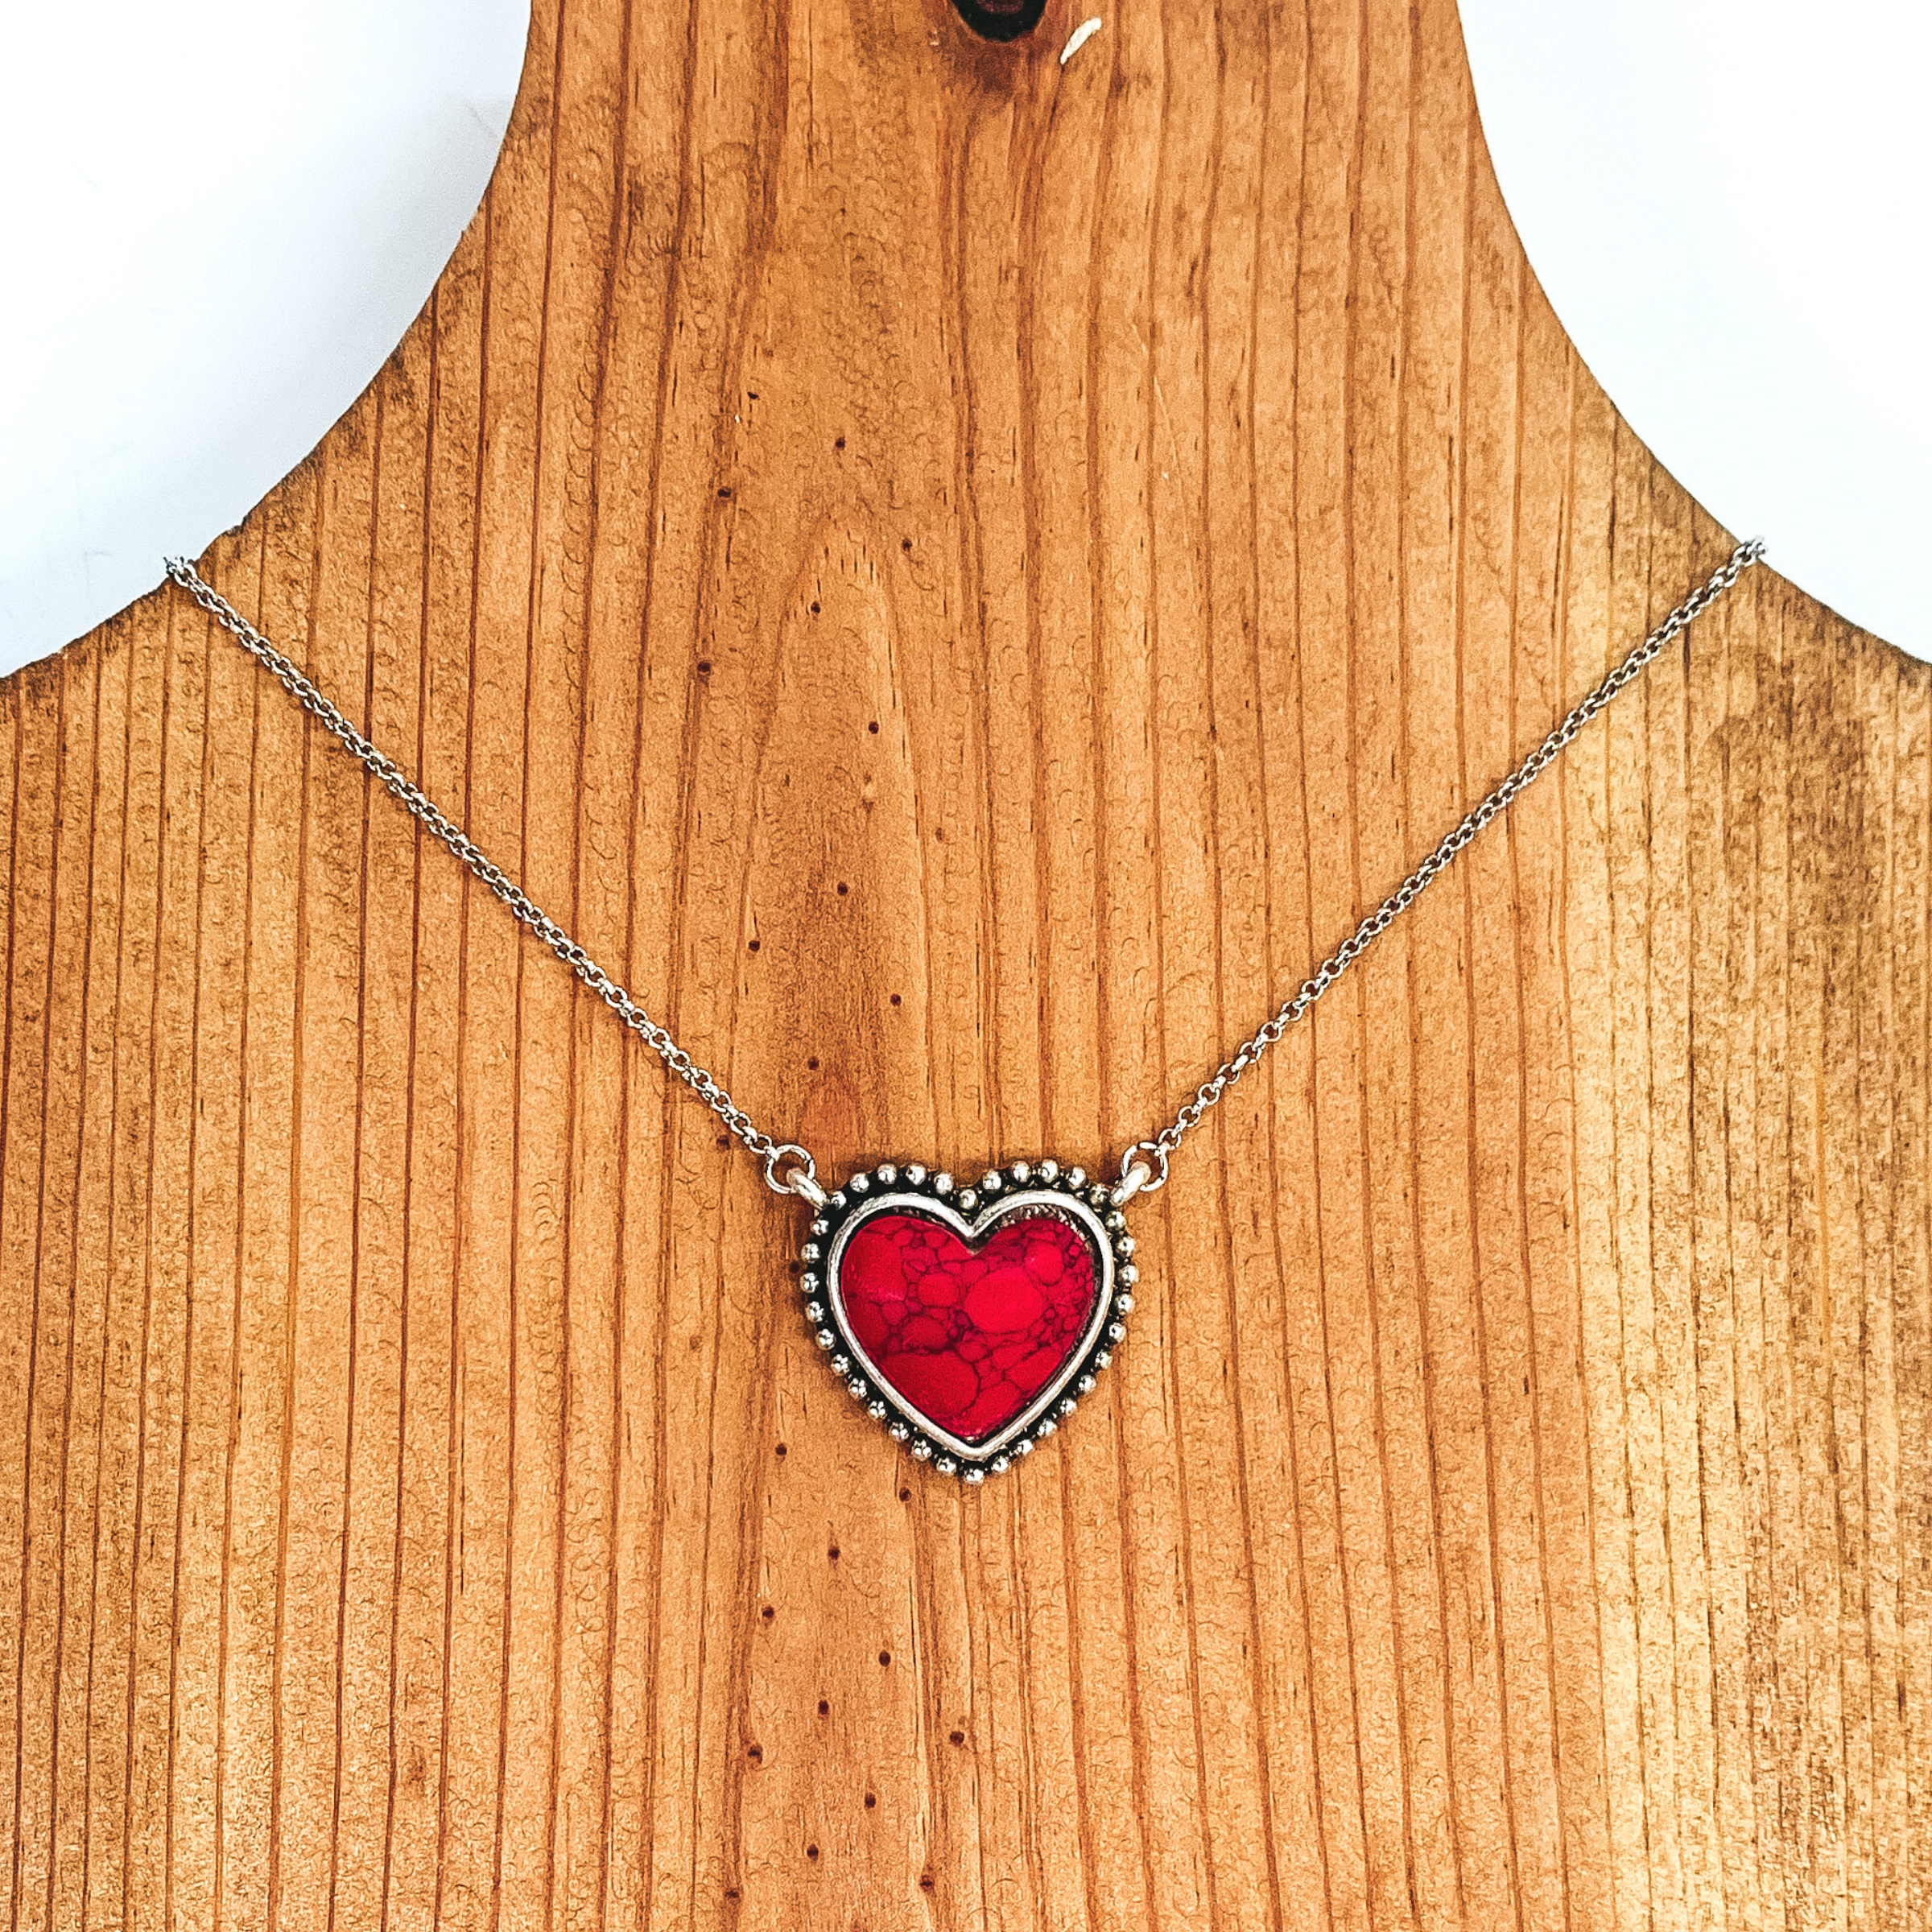 Silver chained necklace with a small red, heart shaped stone pendant. This necklace is pictured laying on a brown necklace holder on a white and black background.